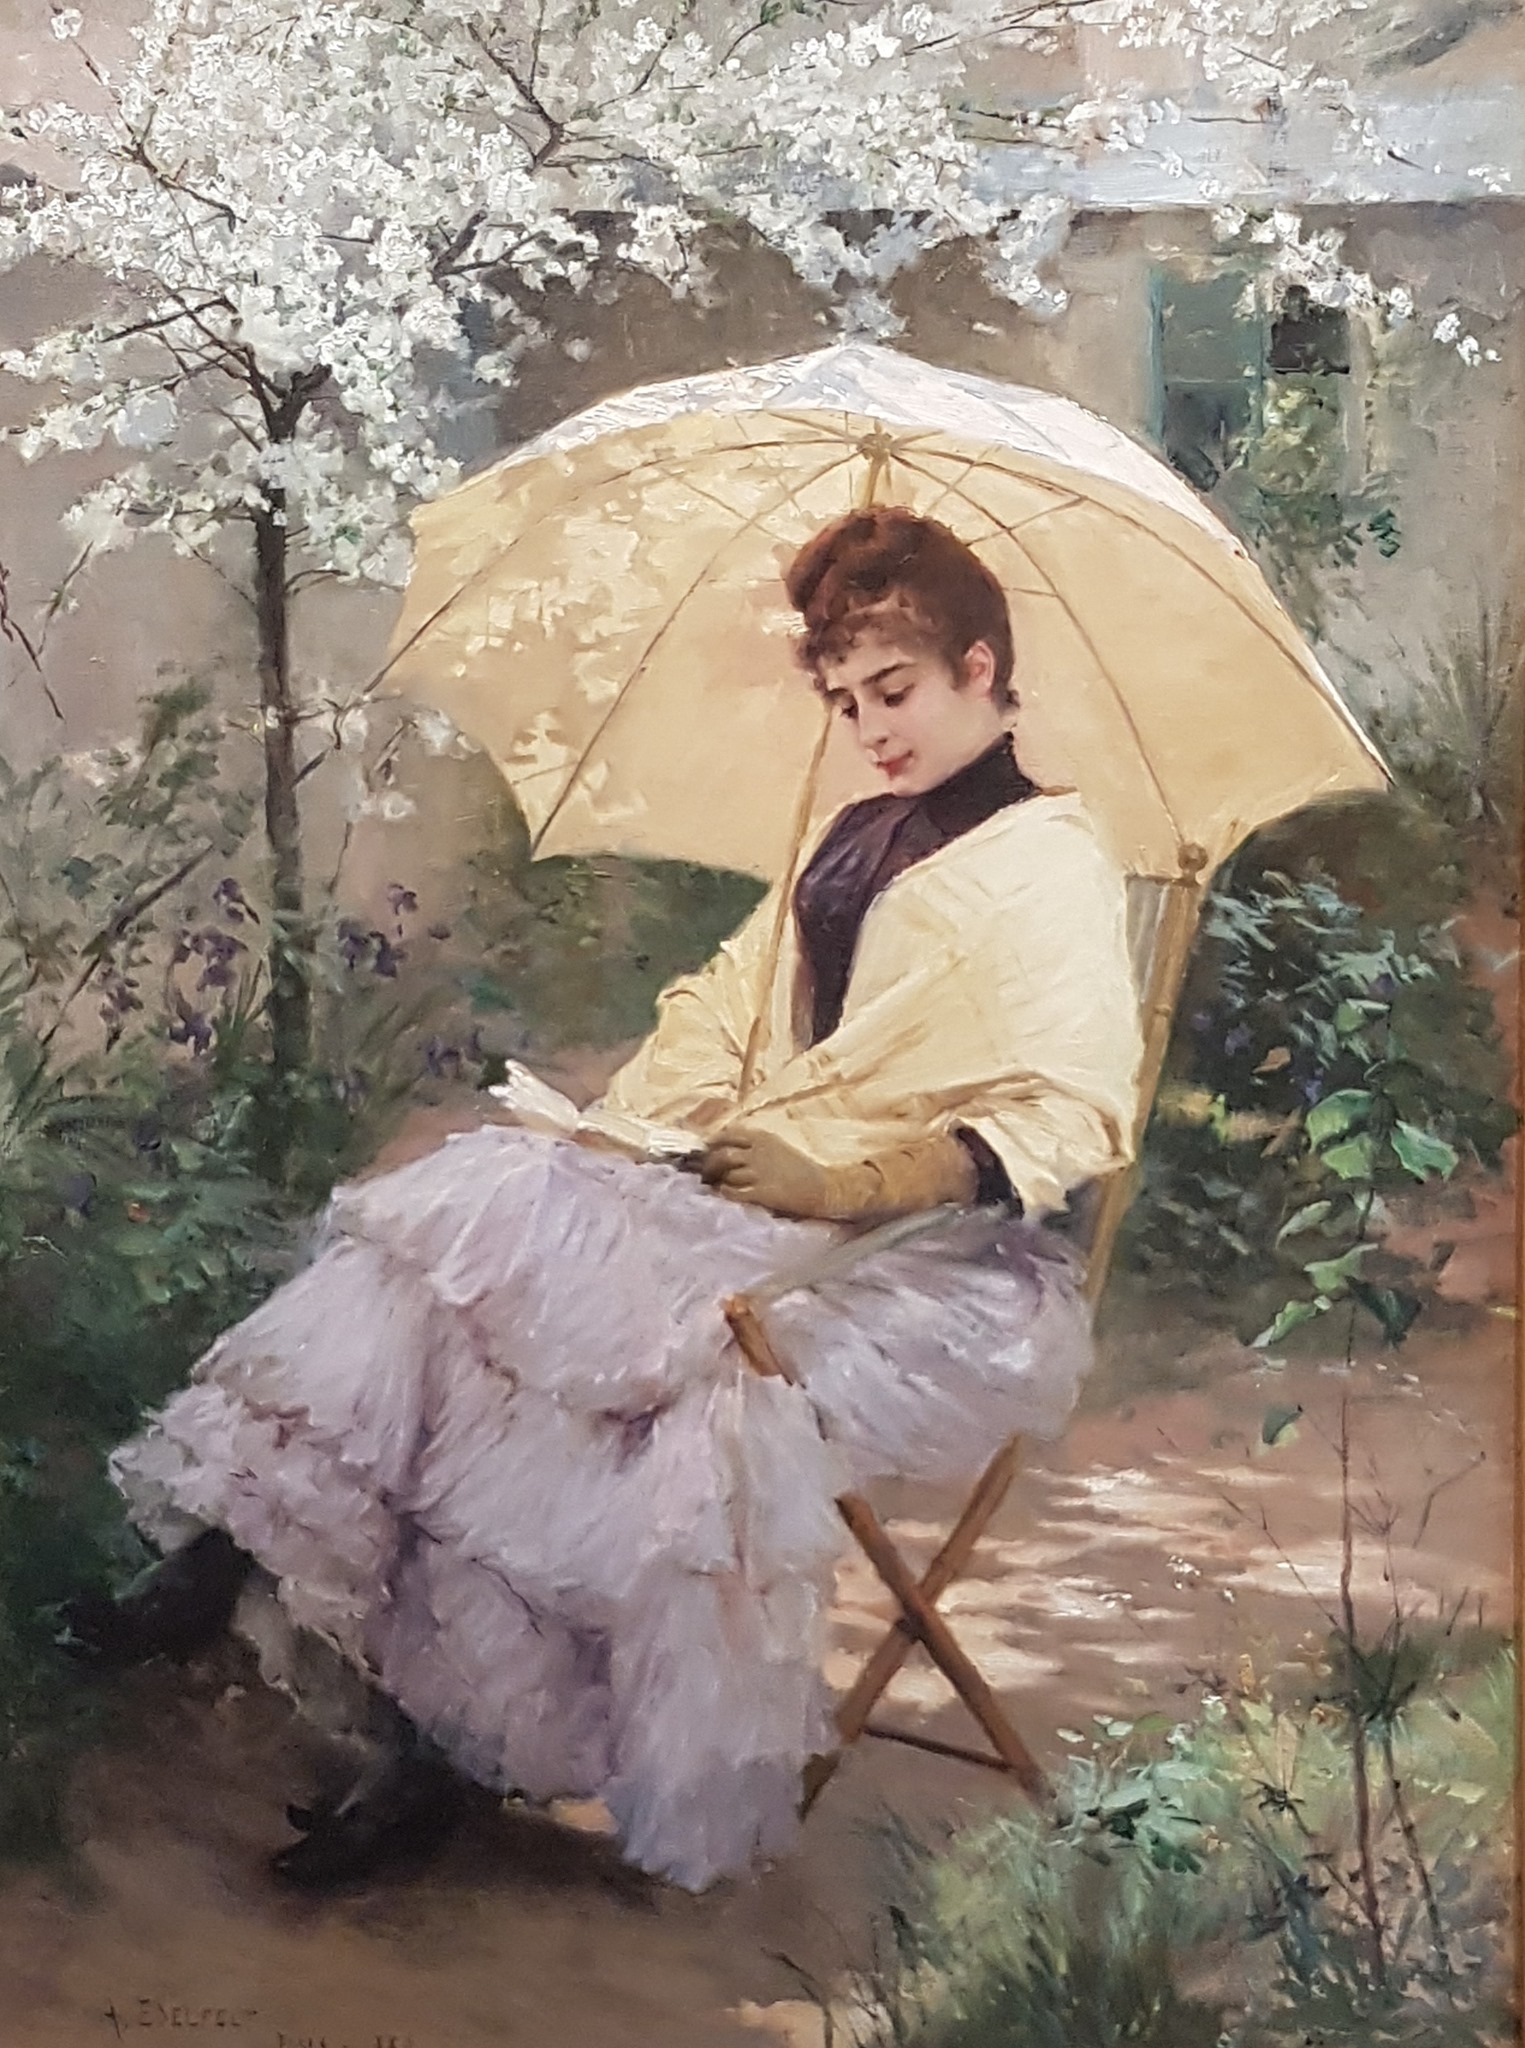 A woman with a parasol sitting on a chair reading a book under the shade of a tree